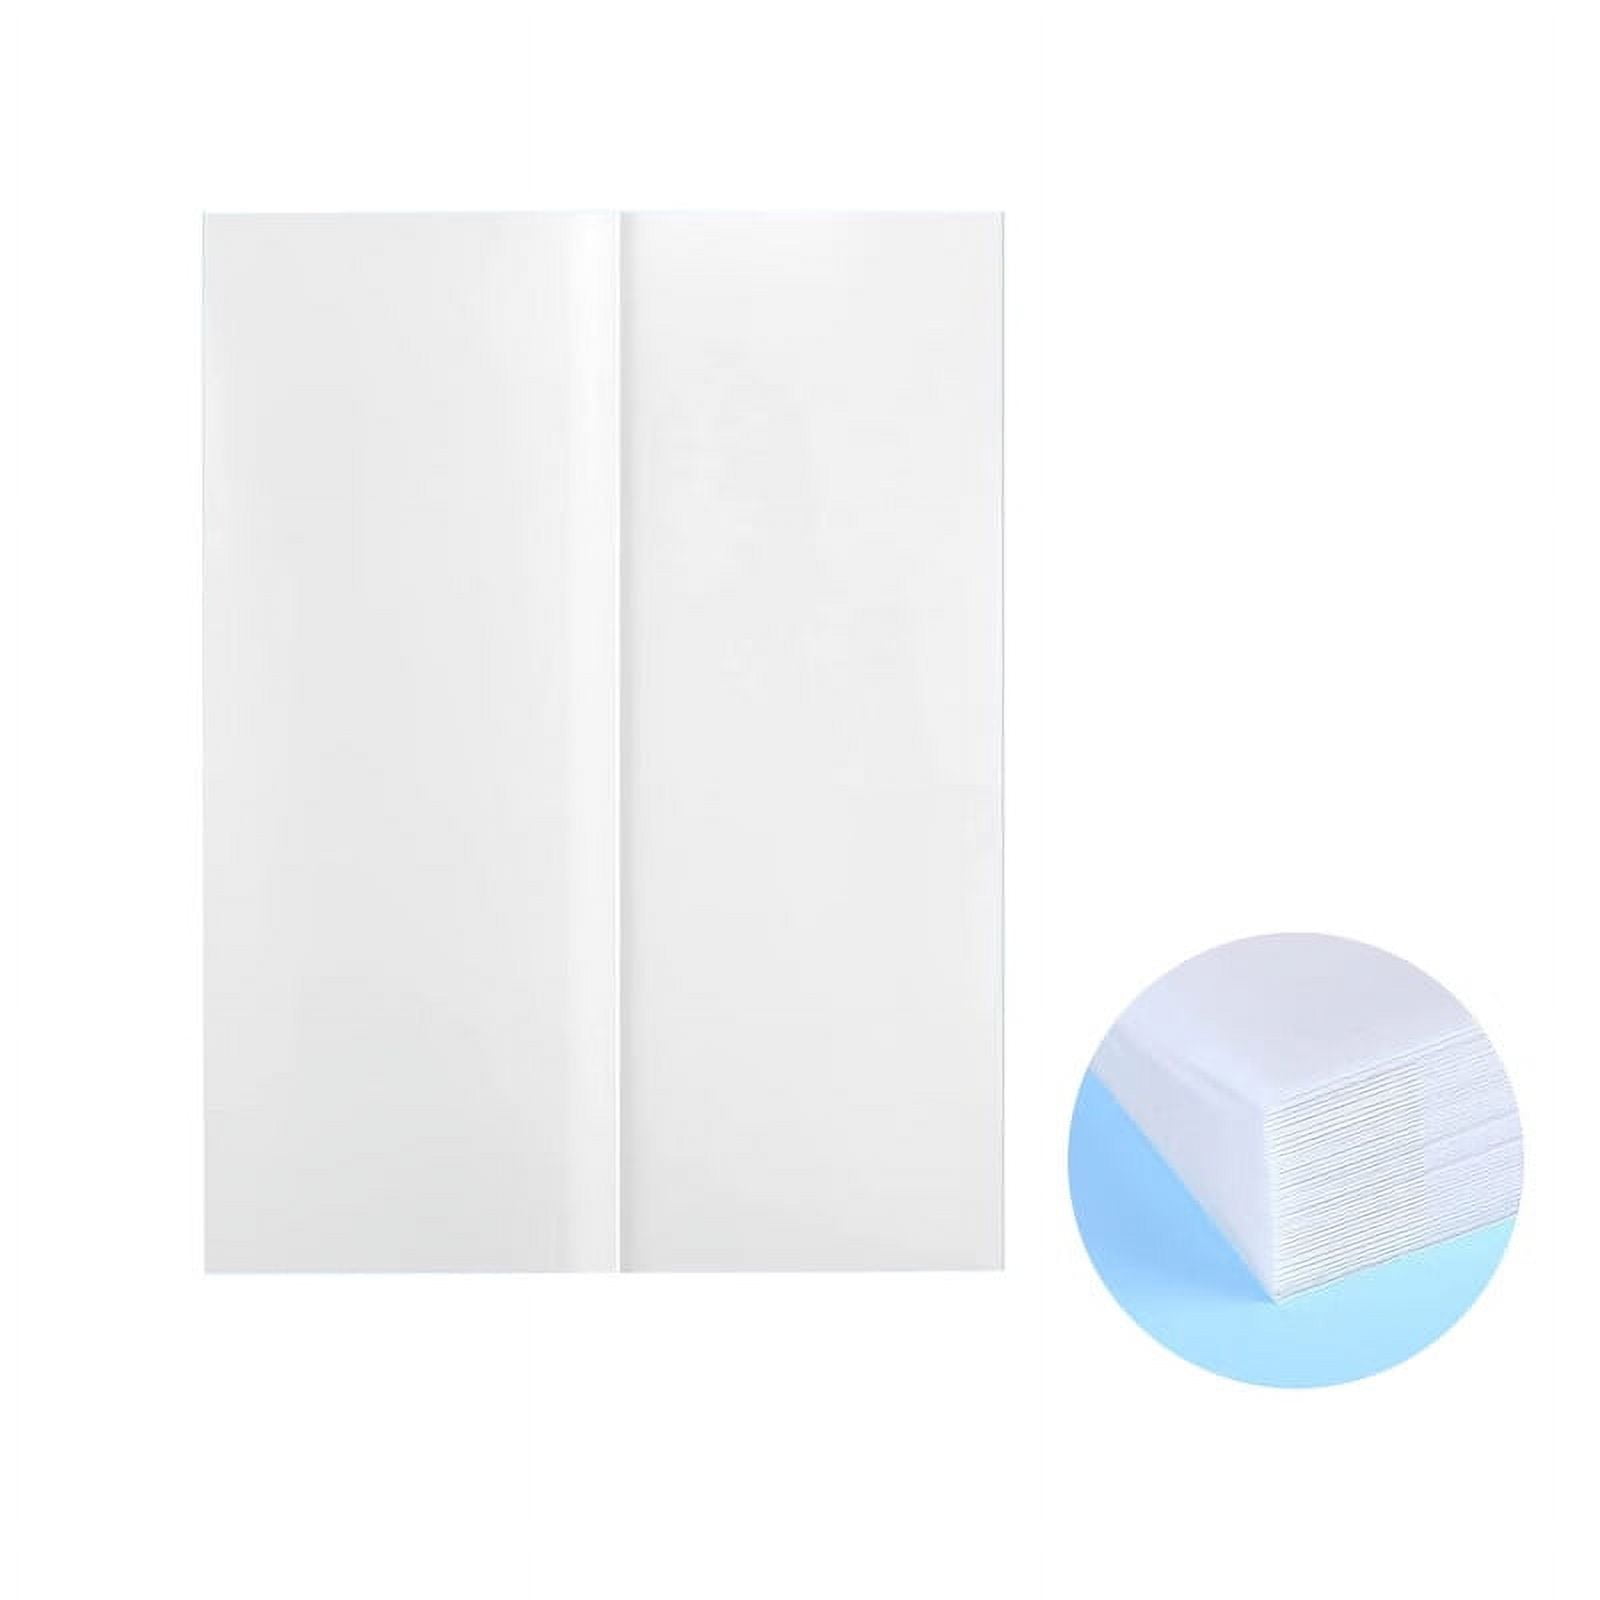 Translucent Invitation Card Cover - Enhance Your Invitations with Vellum  Envelopes - for Weddings And Special Occasions - Pack of 50 